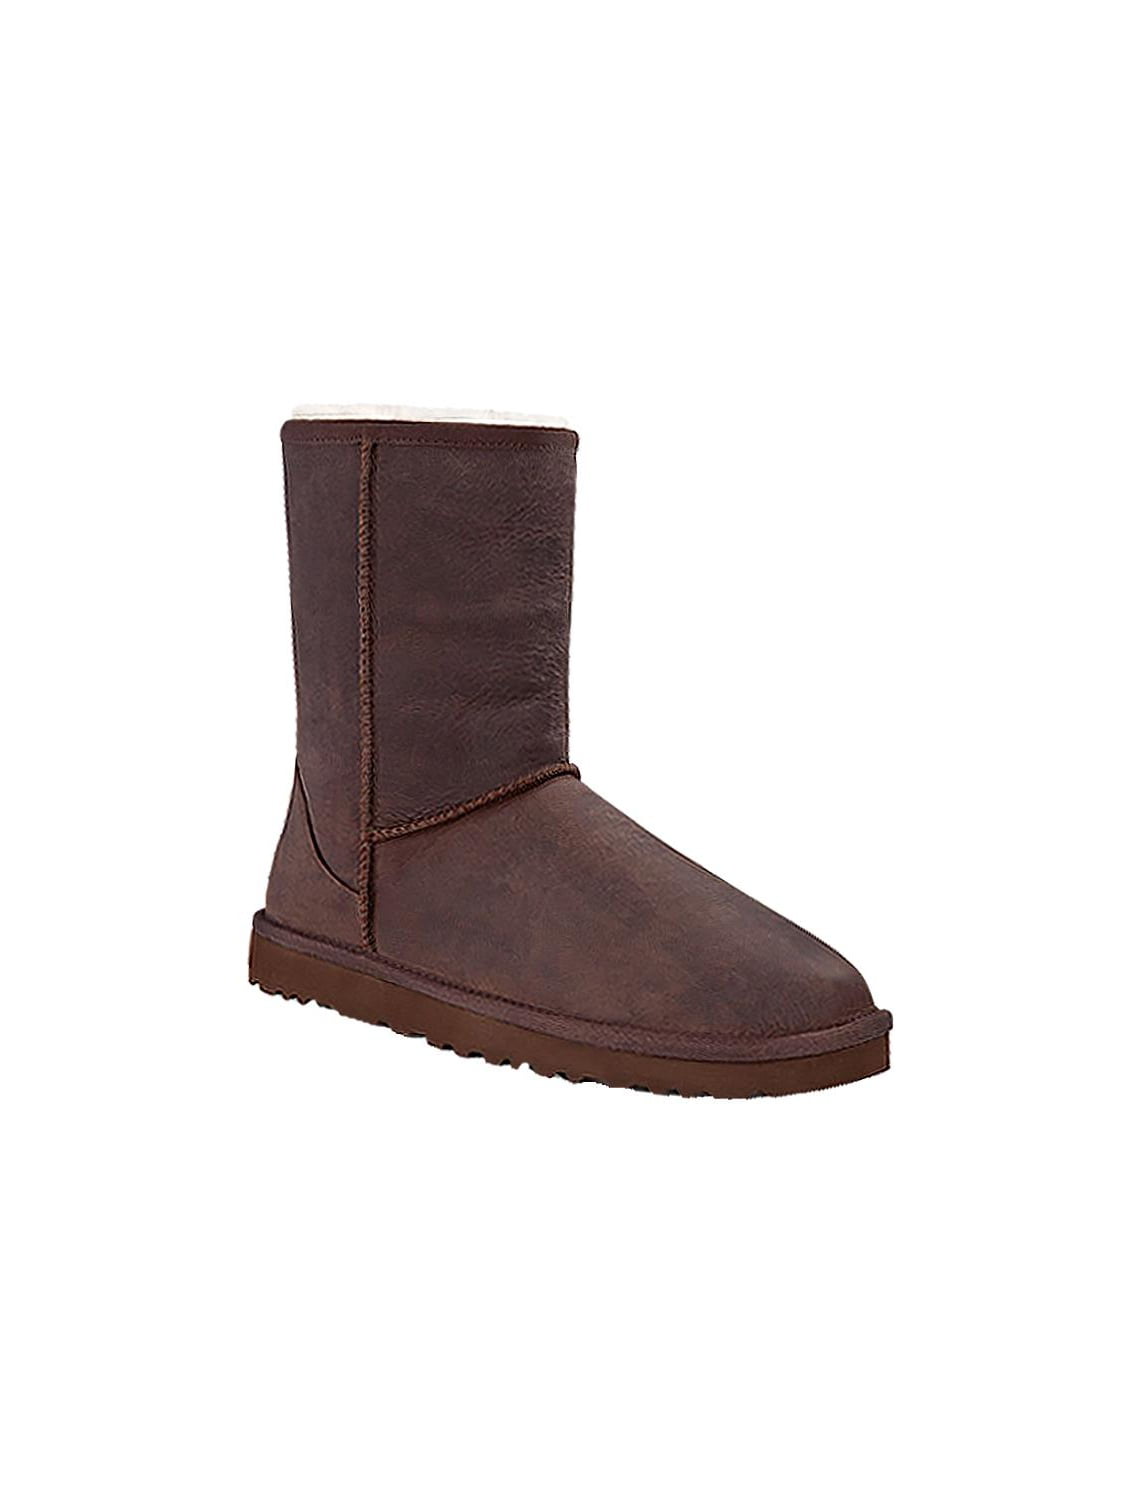 ugg womens classic short leather boots brownstone